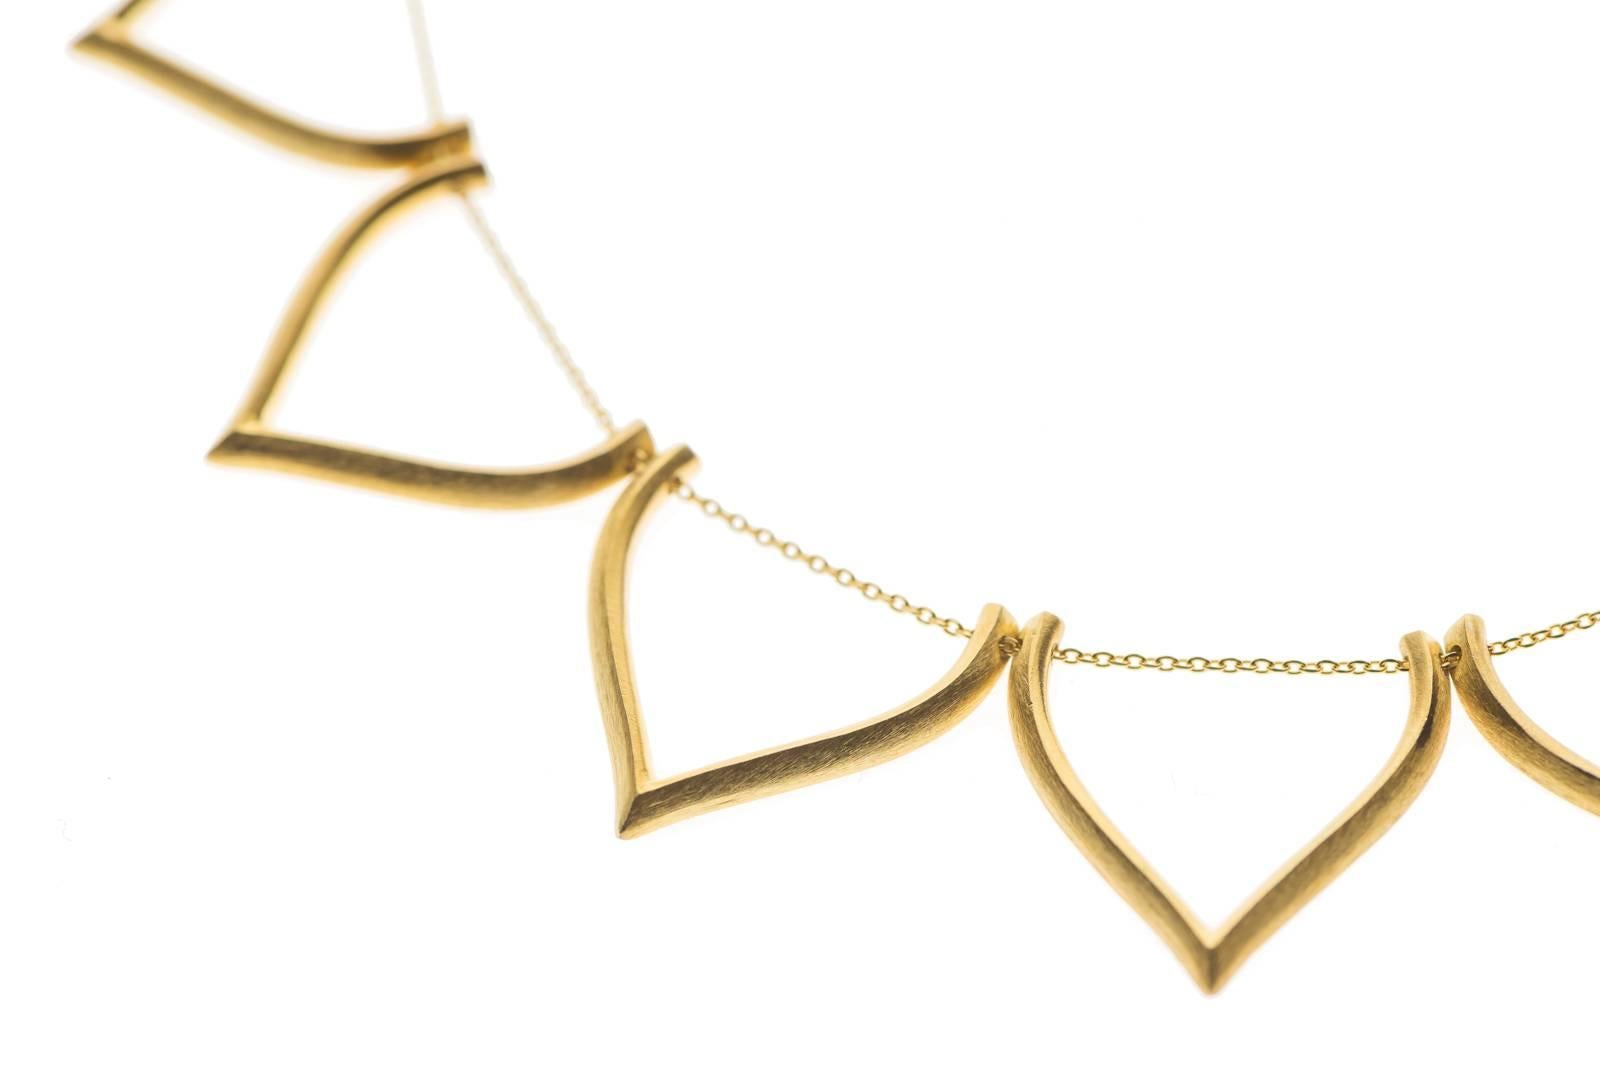  Timeless sterling silver 18k-gold plated necklace featuring lotus shaped motifs with option for enamel coverage. Every motif has been individually hand-crafted, finished and threaded to the chain by local skilled Greek craftsmen.

This piece is